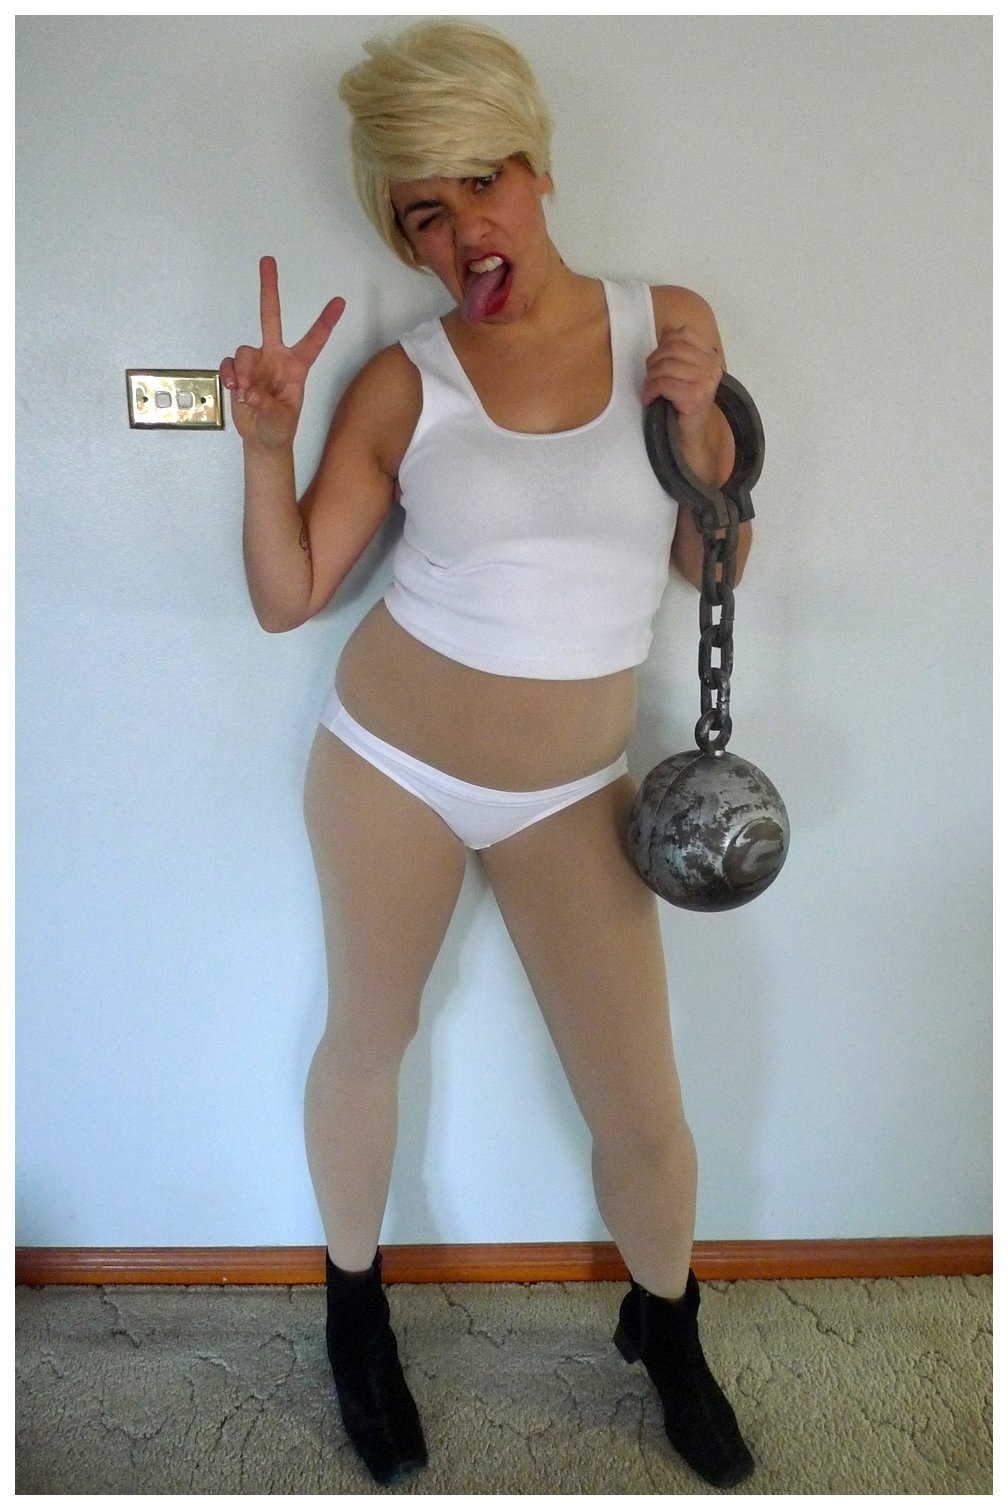 10 Lovable Miley Cyrus Halloween Costume Ideas miley cyrus wrecking ball costume wow pinterest miley cyrus 2022